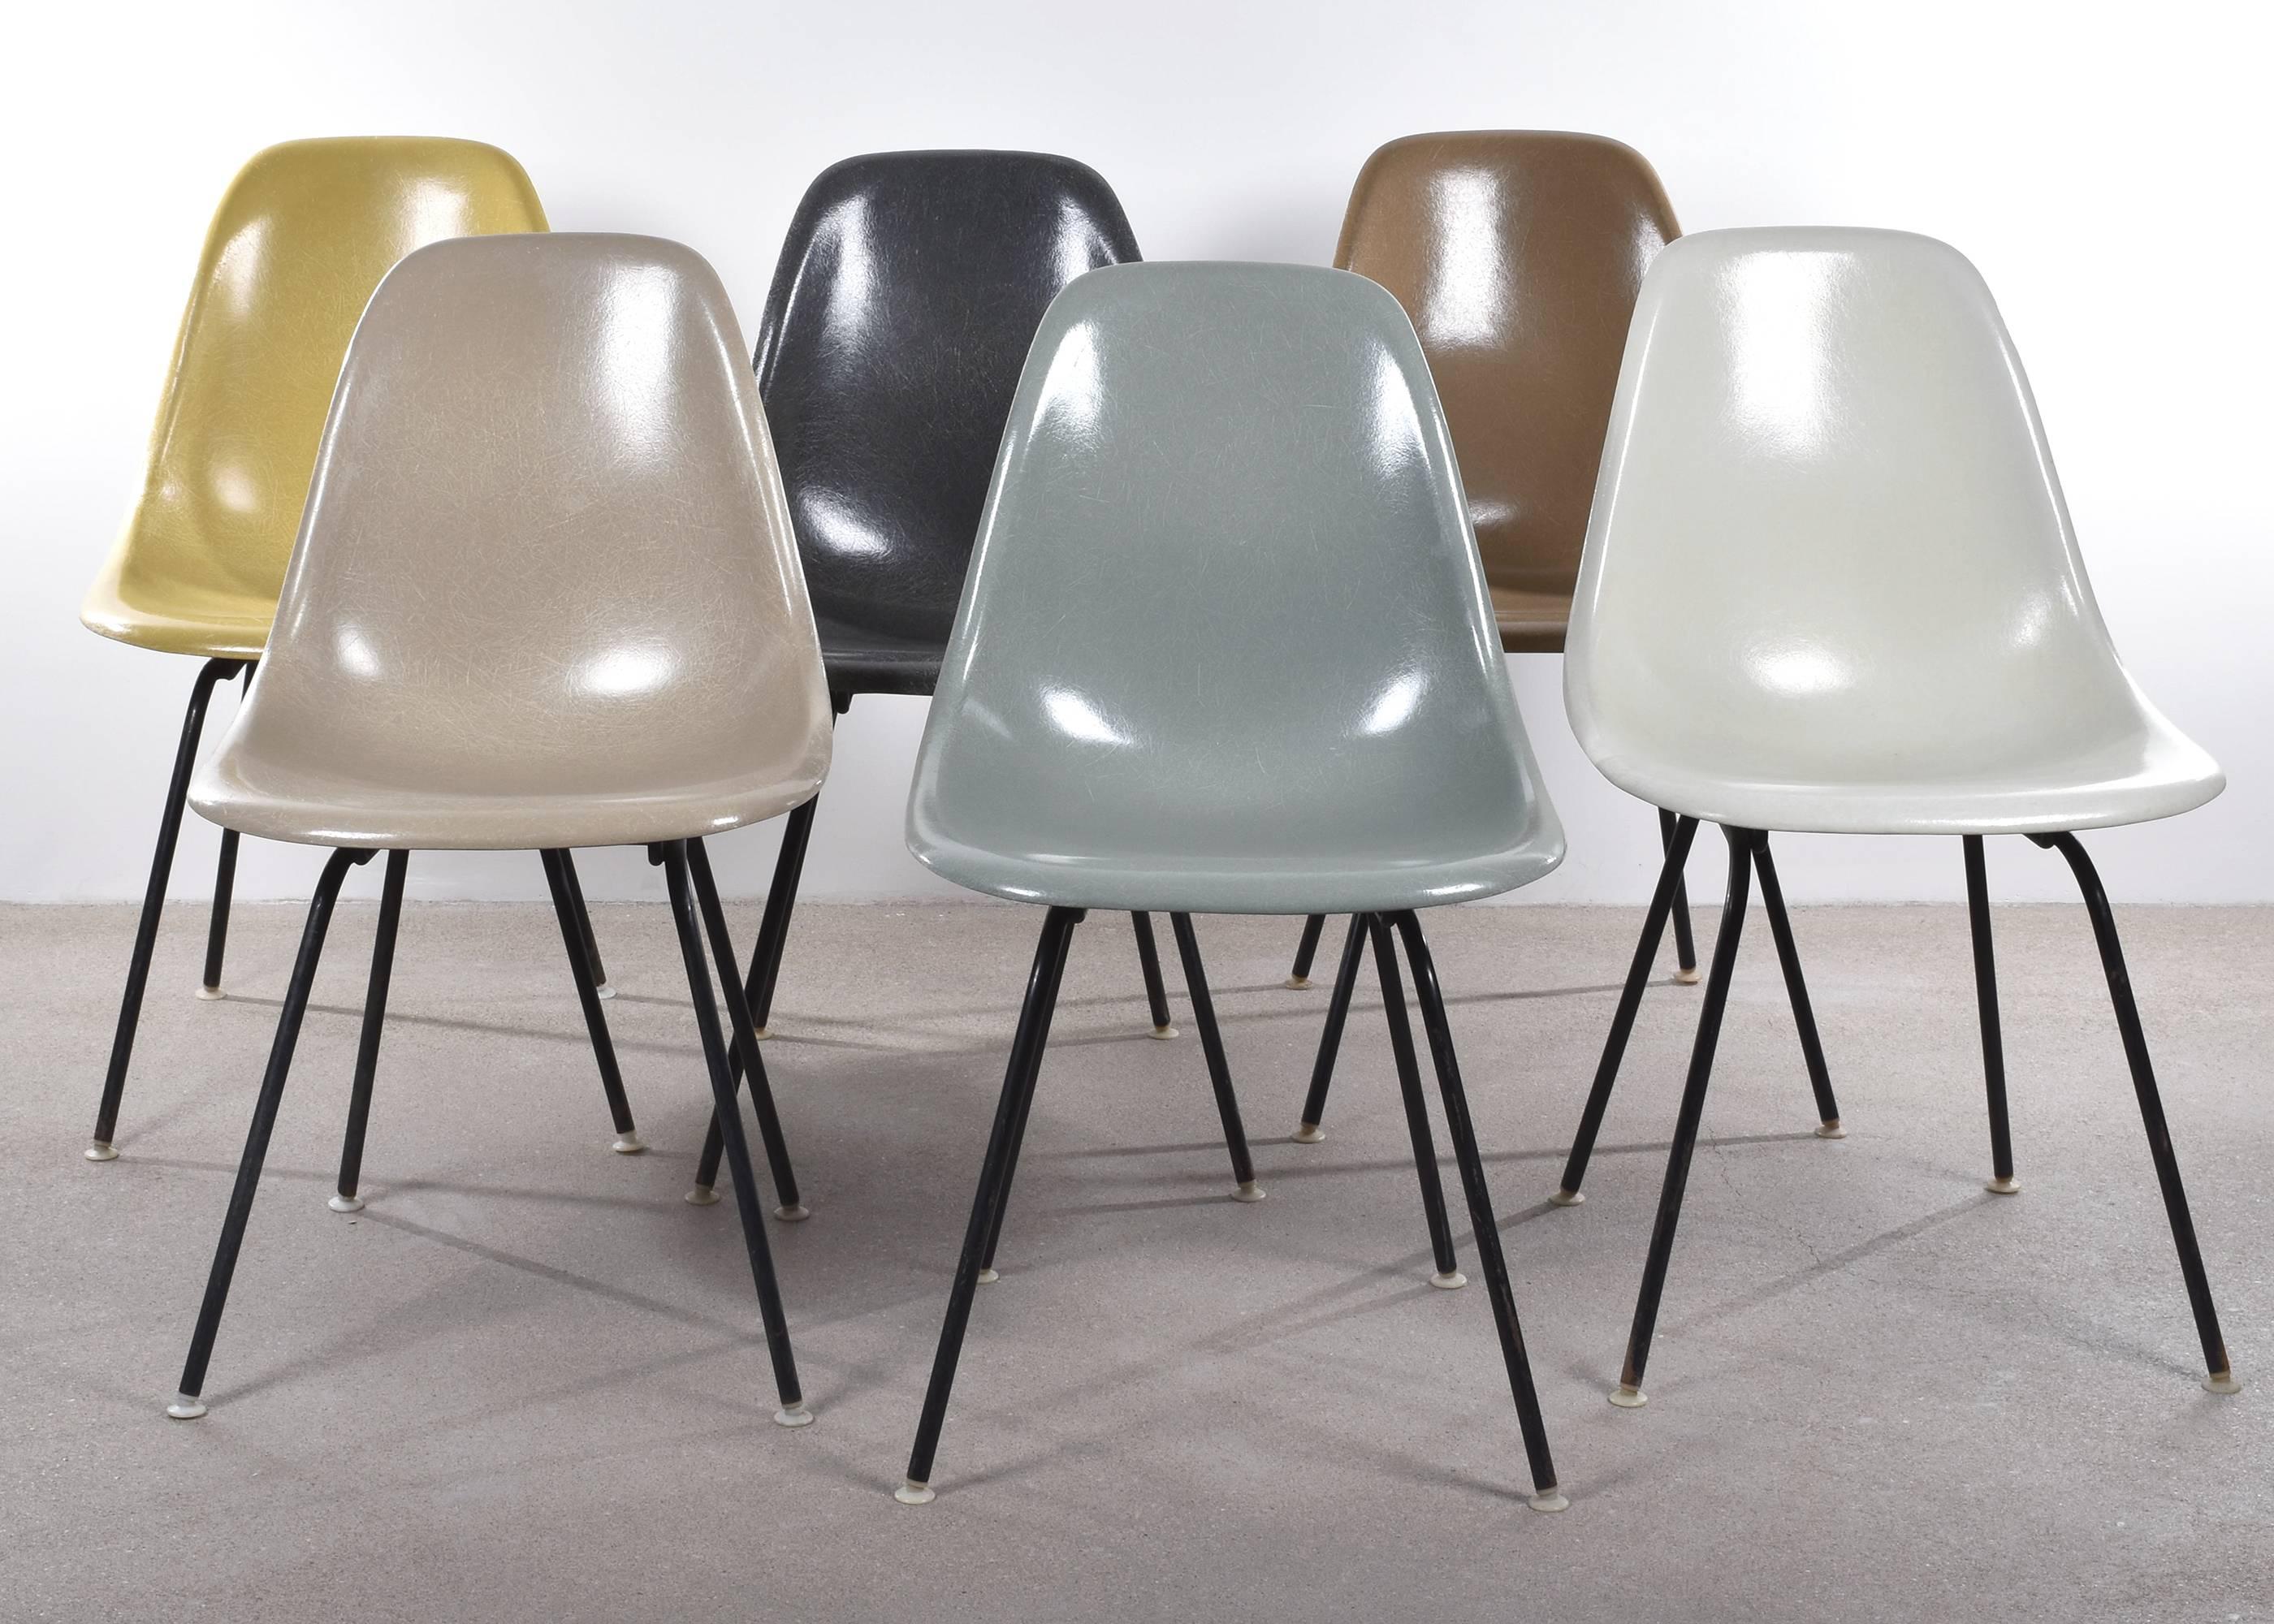 Beautiful iconic DSX chairs in natural colors: Parchment, Greige, Ochre Light, Elephant Hide Grey, Sea Foam Green, Tan Light (Raw Umber).
Shells are in very good or excellent condition with only slight traces of use. Replaced shock mounts which